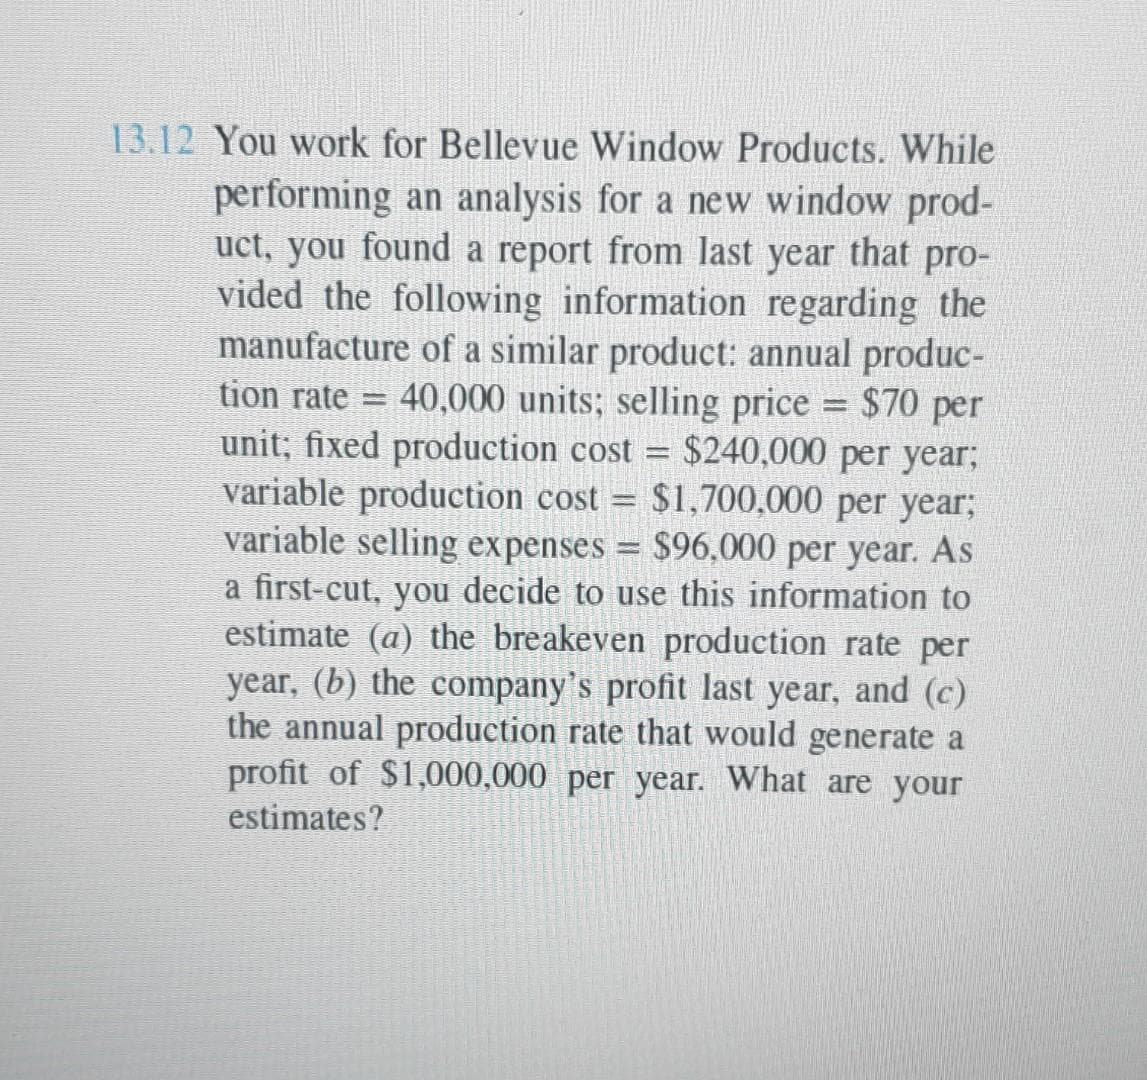 13.12 You work for Bellevue Window Products. While
performing an analysis for a new window prod-
uct, you found a report from last year that pro-
vided the following information regarding the
manufacture of a similar product: annual produc-
tion rate T 40,000 units; selling price = $70 per
unit; fixed production cost = $240,000 per year;
variable production cost = $1,700,000 per year;
variable selling expenses = $96,000 per year. As
a first-cut, you decide to use this information to
estimate (a) the breakeven production rate per
year, (b) the company's profit last year, and (c)
the annual production rate that would generate a
profit of $1,000,000 per year. What are your
estimates?